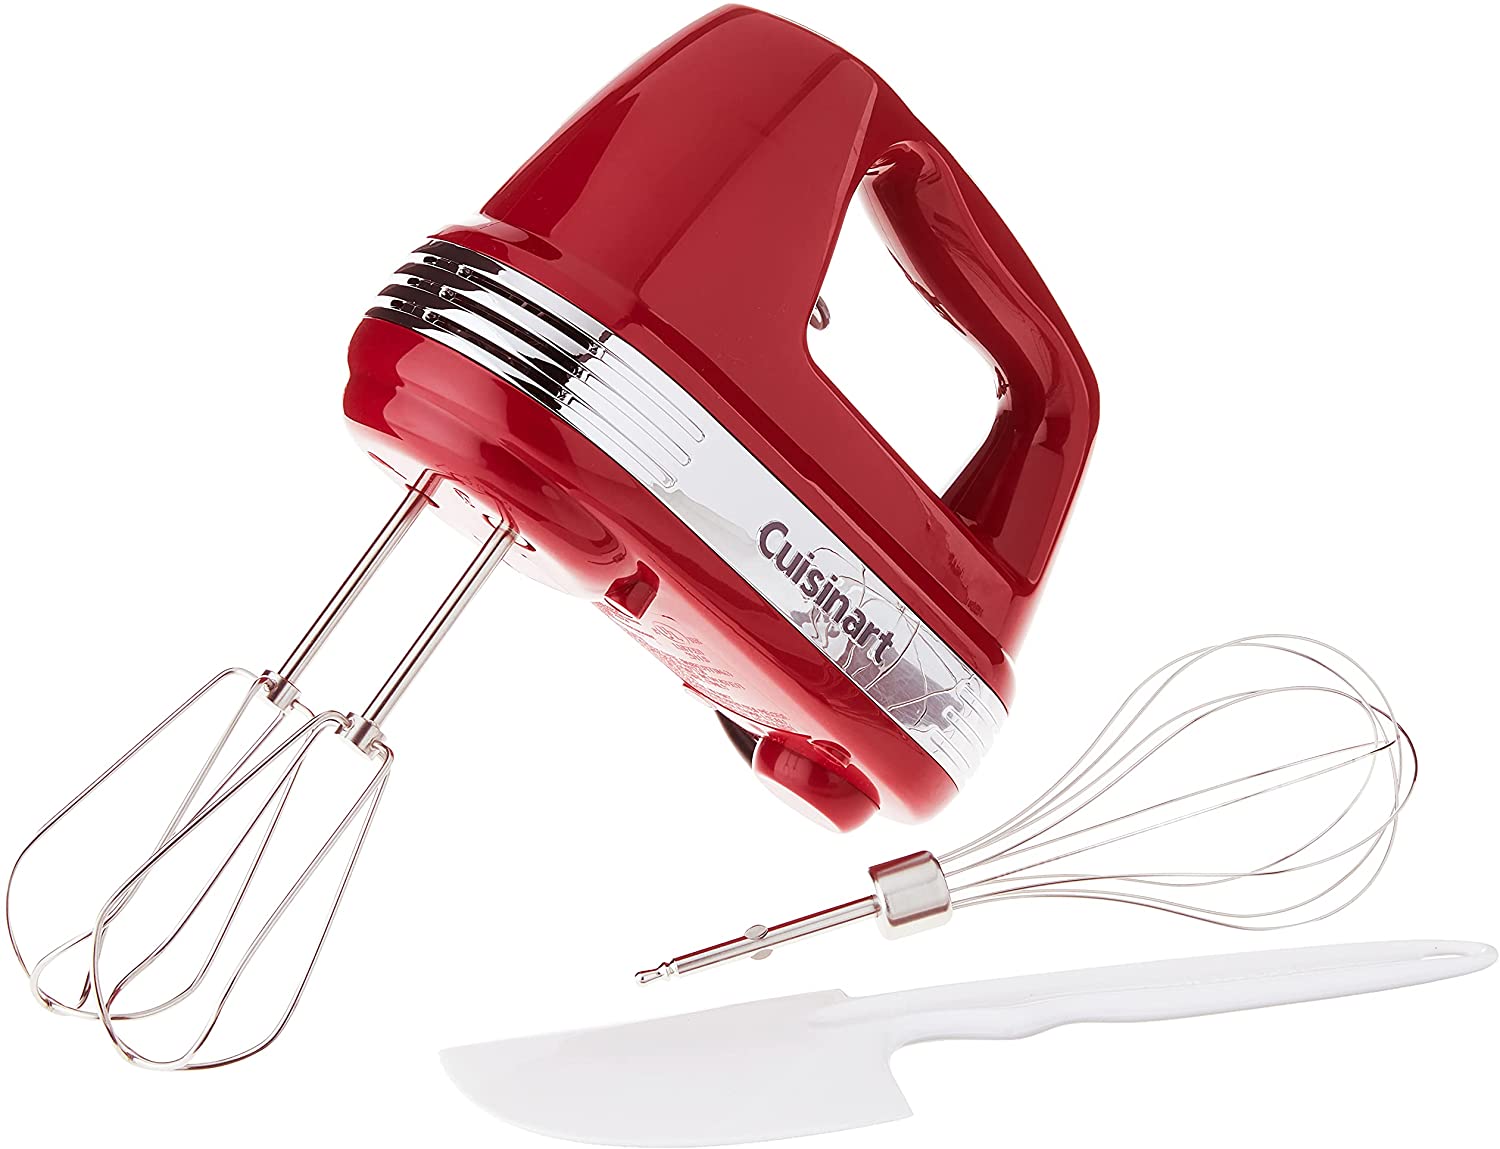 Cuisinart HM-50R Power Advantage 5 Speed Hand Mixer Red - Certified Refurbished